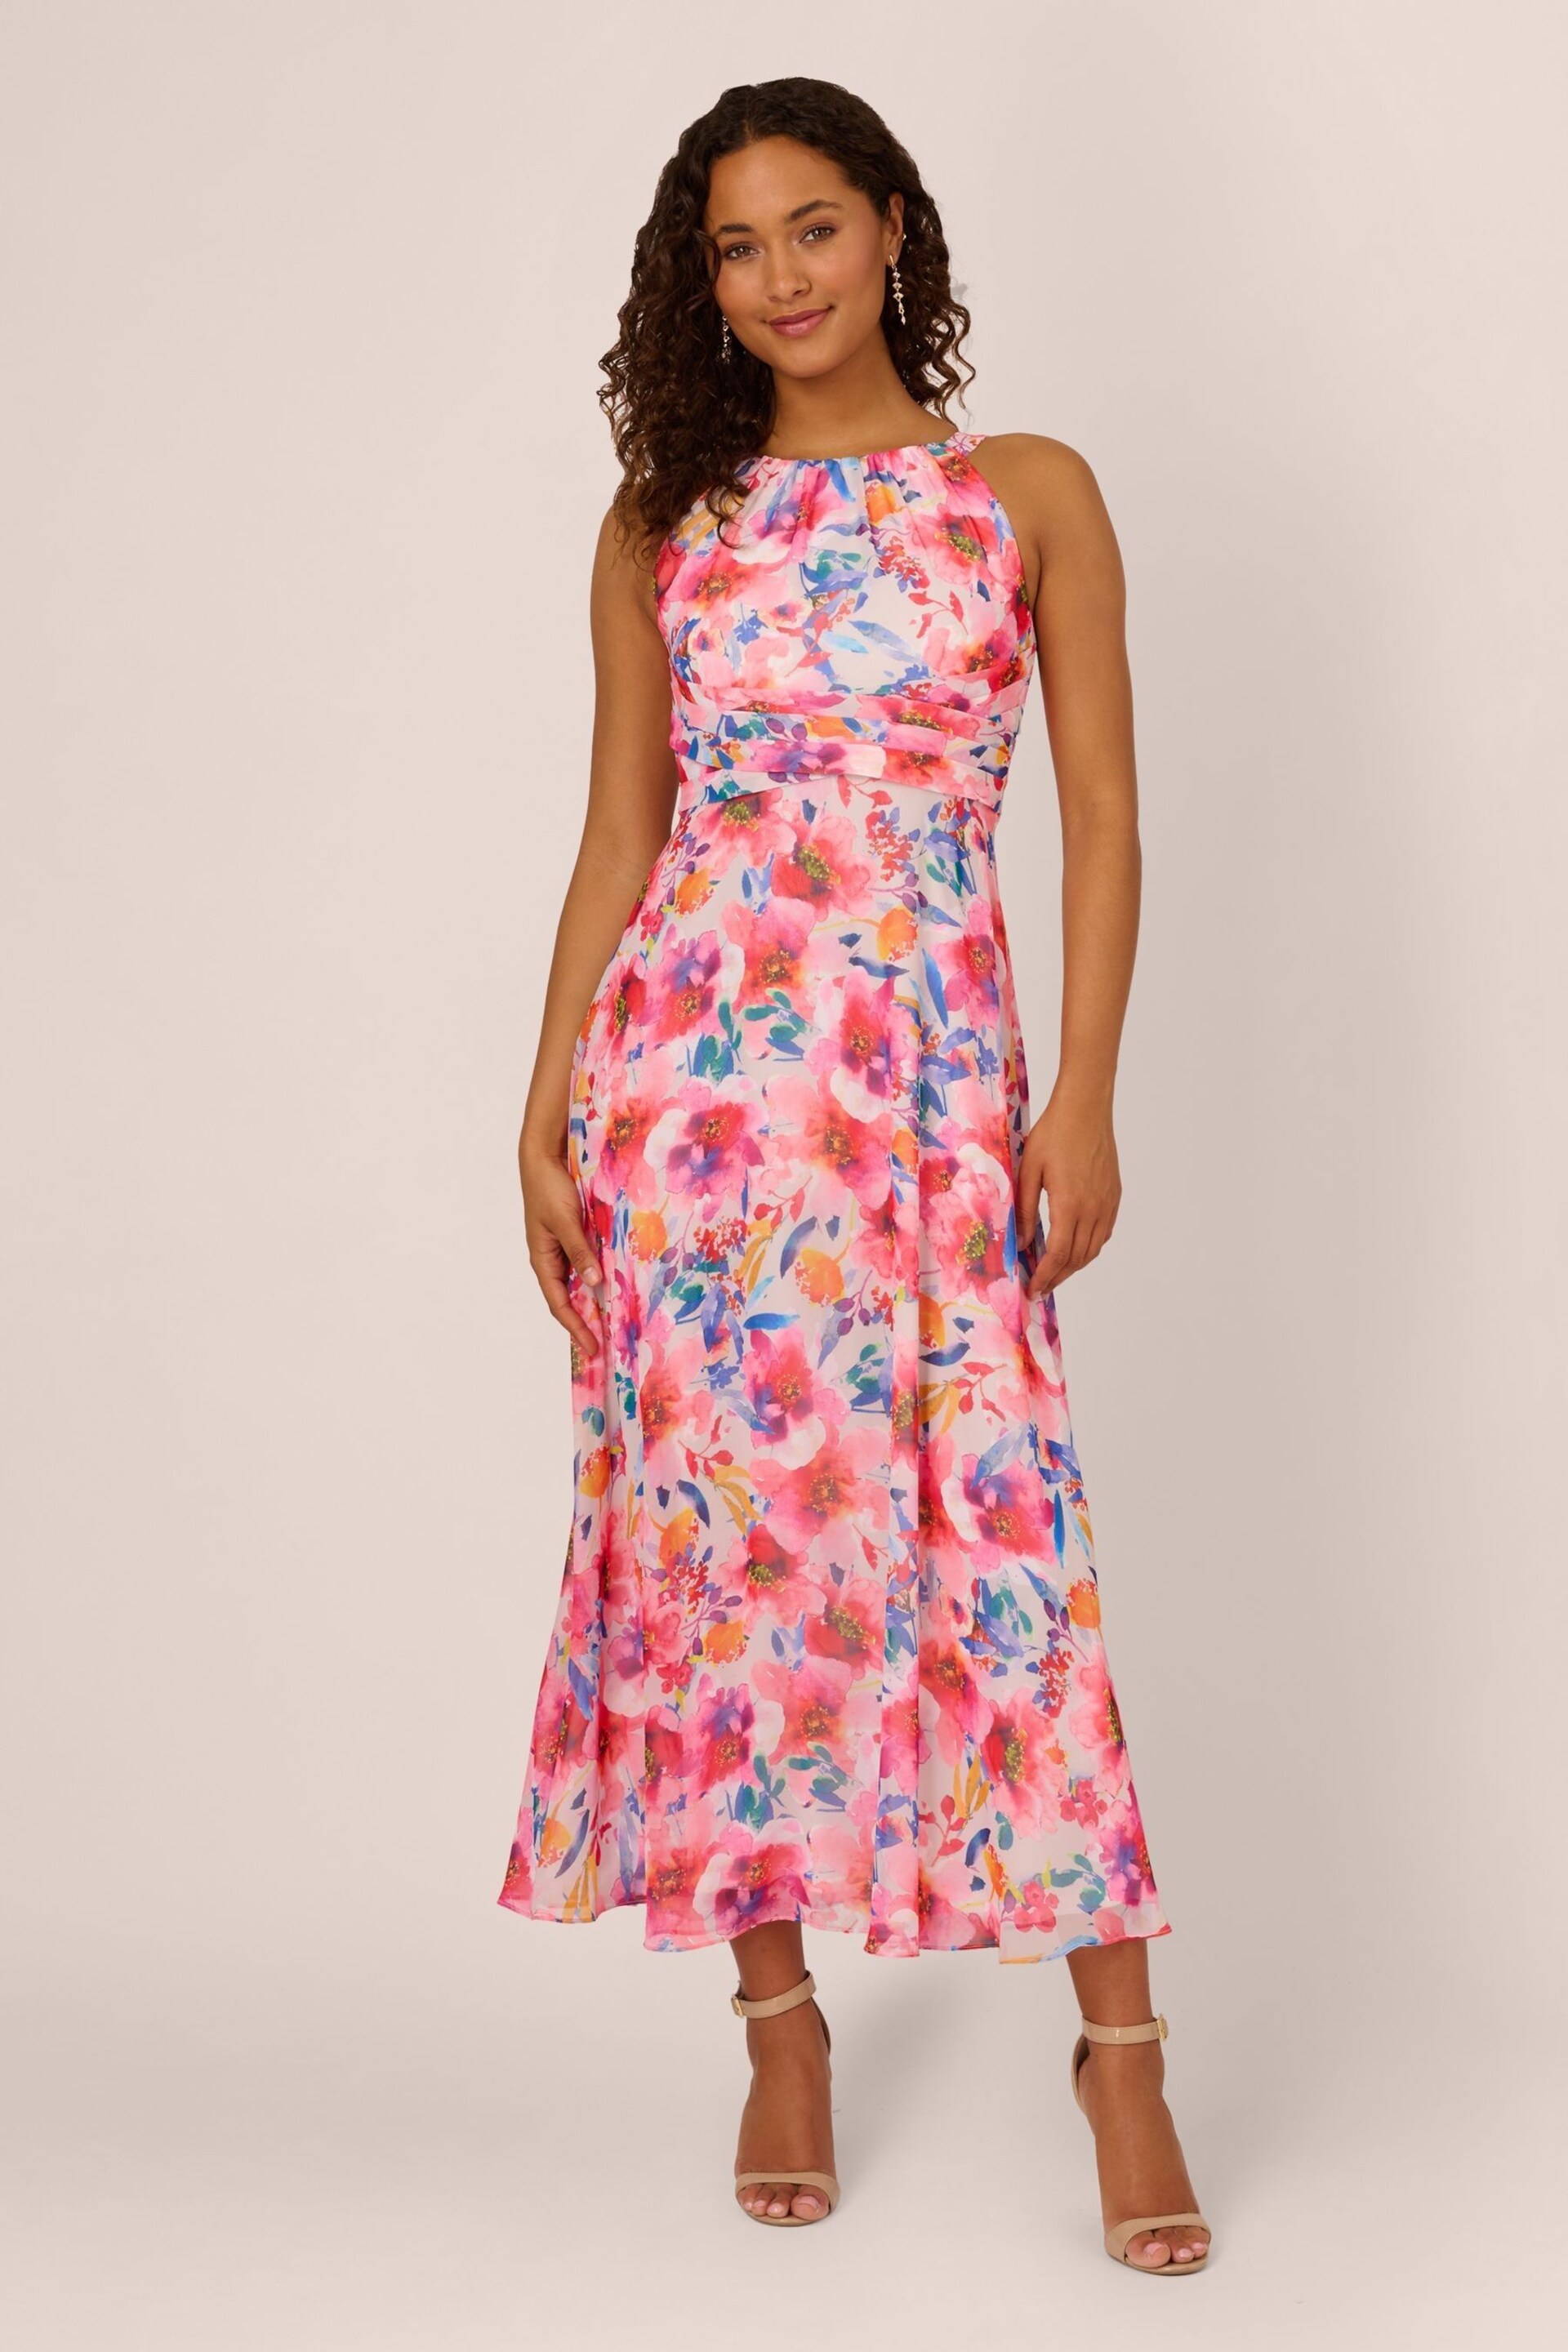 Adrianna Papell Floral Chiffon Halter White Dress - Image 1 of 7